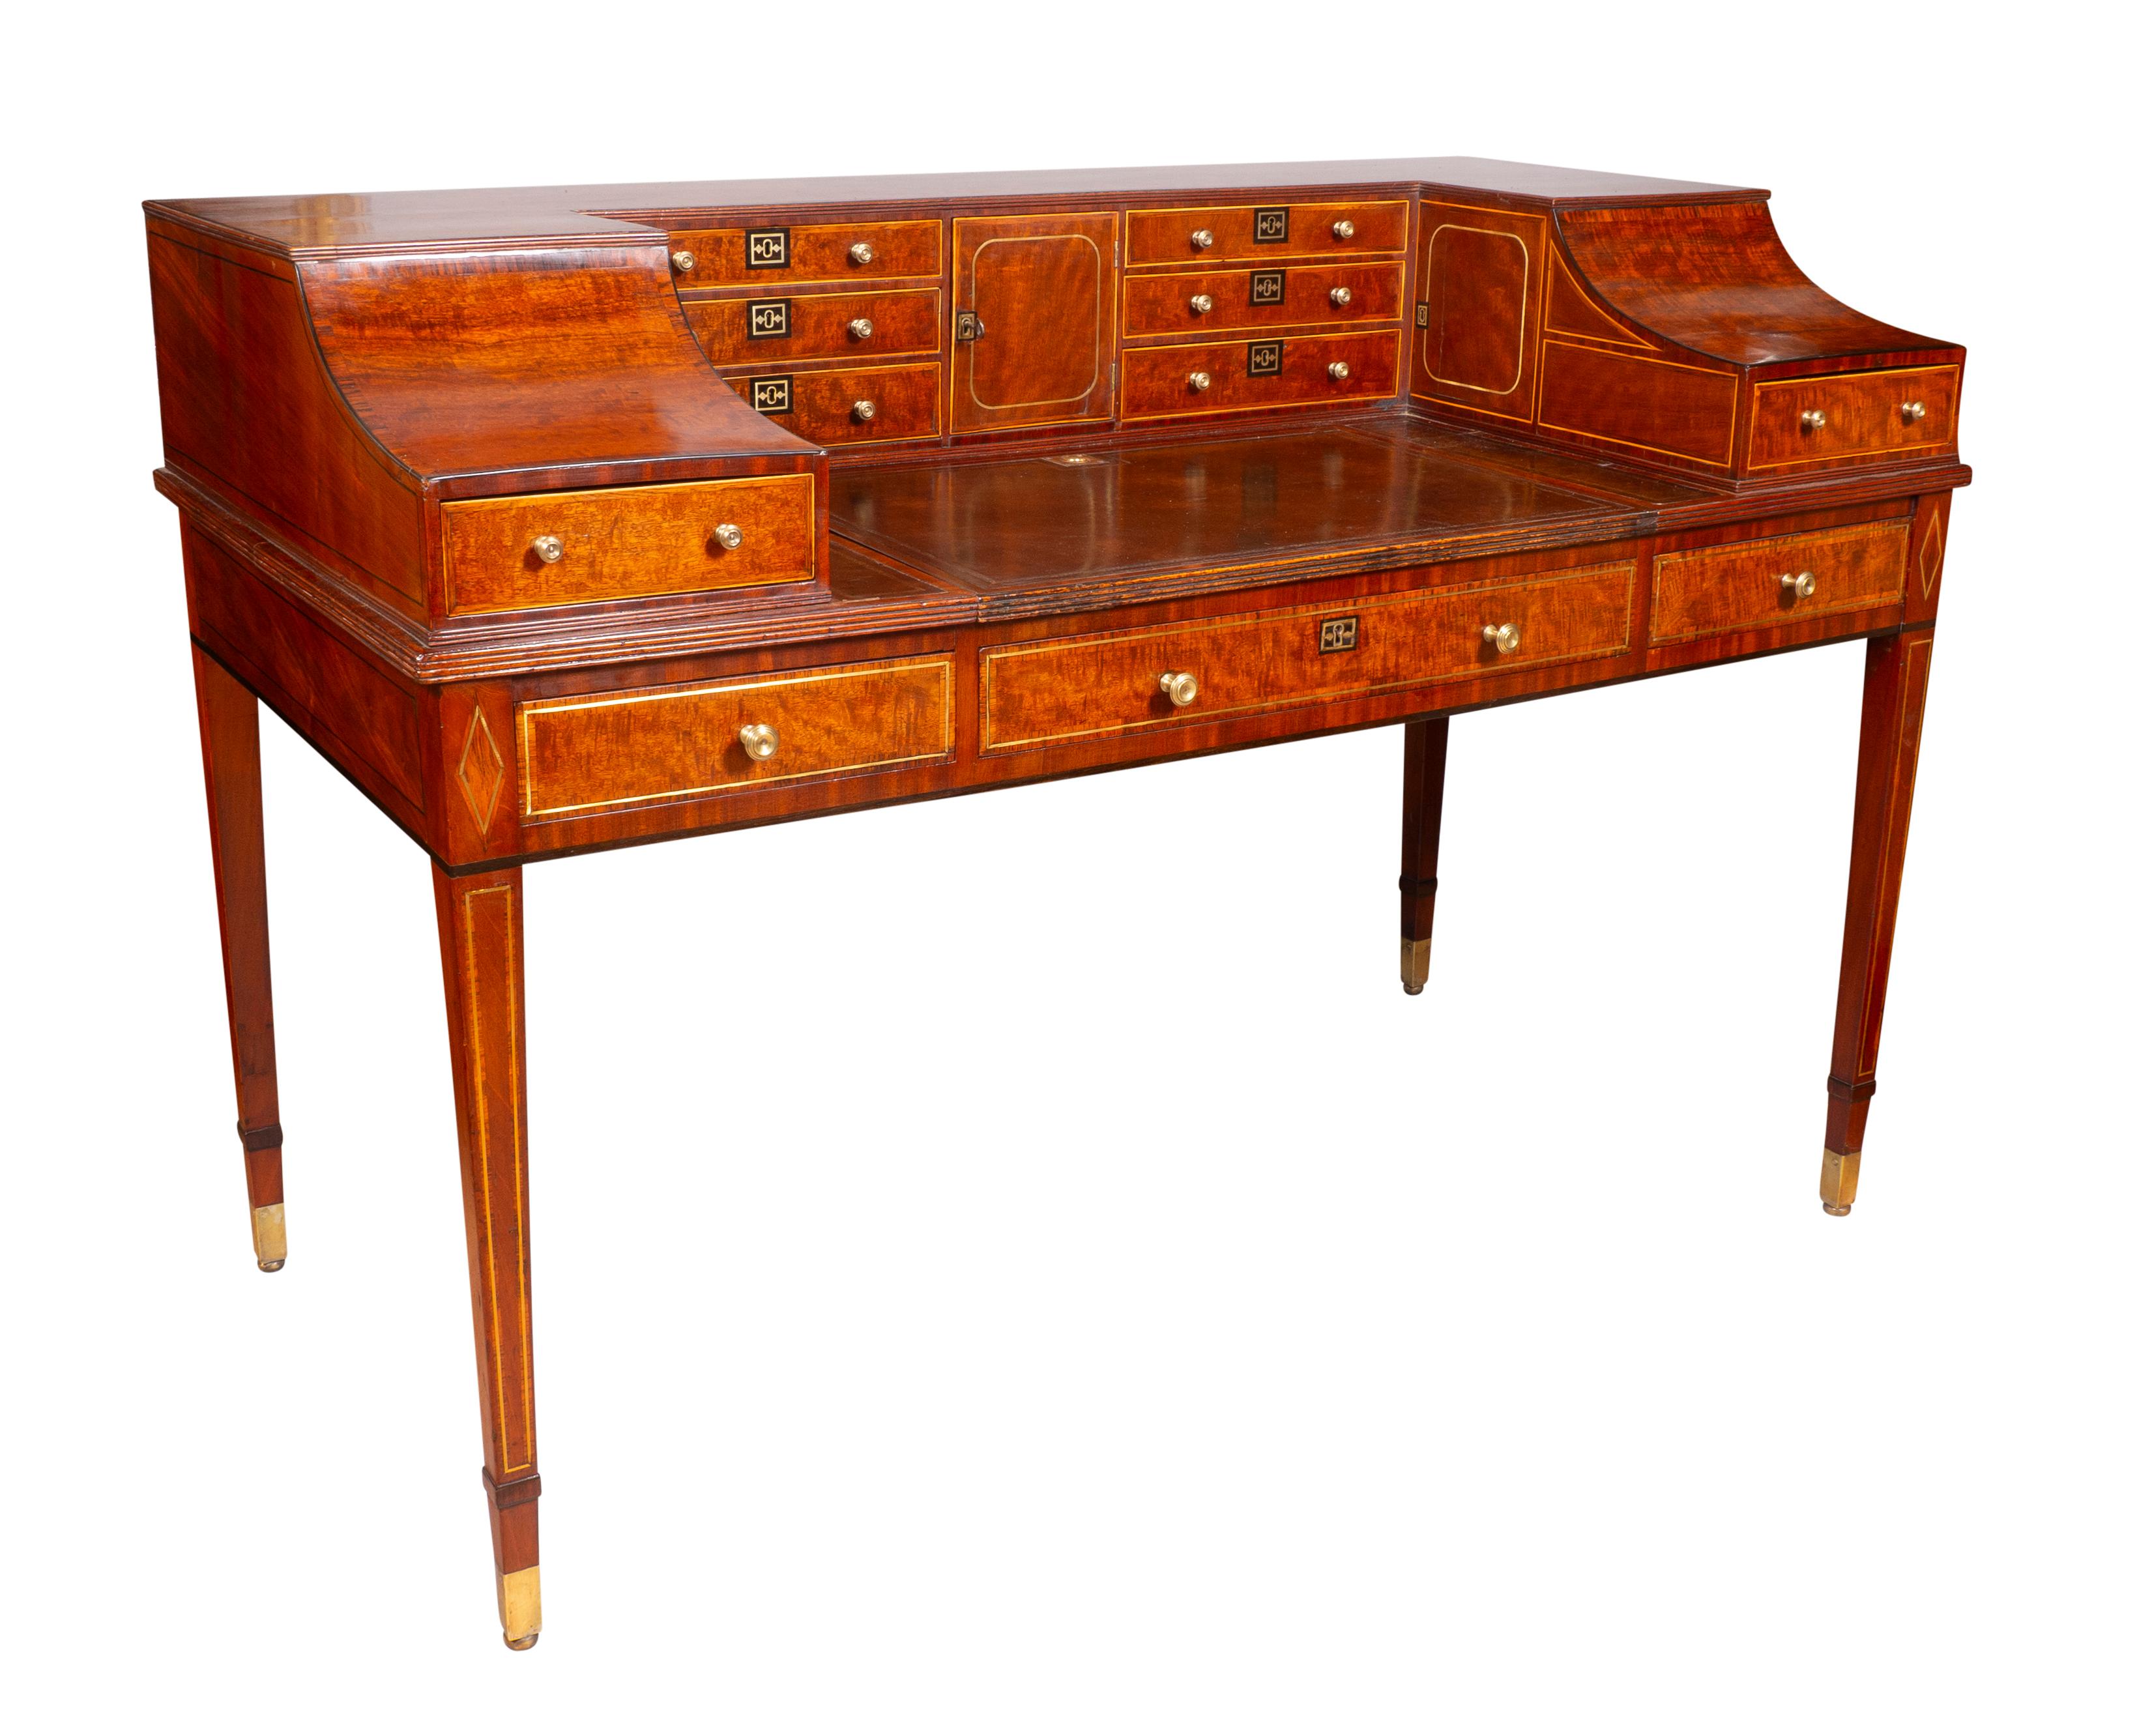 George III Style Mahogany And Brass Inlaid Carleton House Desk For Sale 1